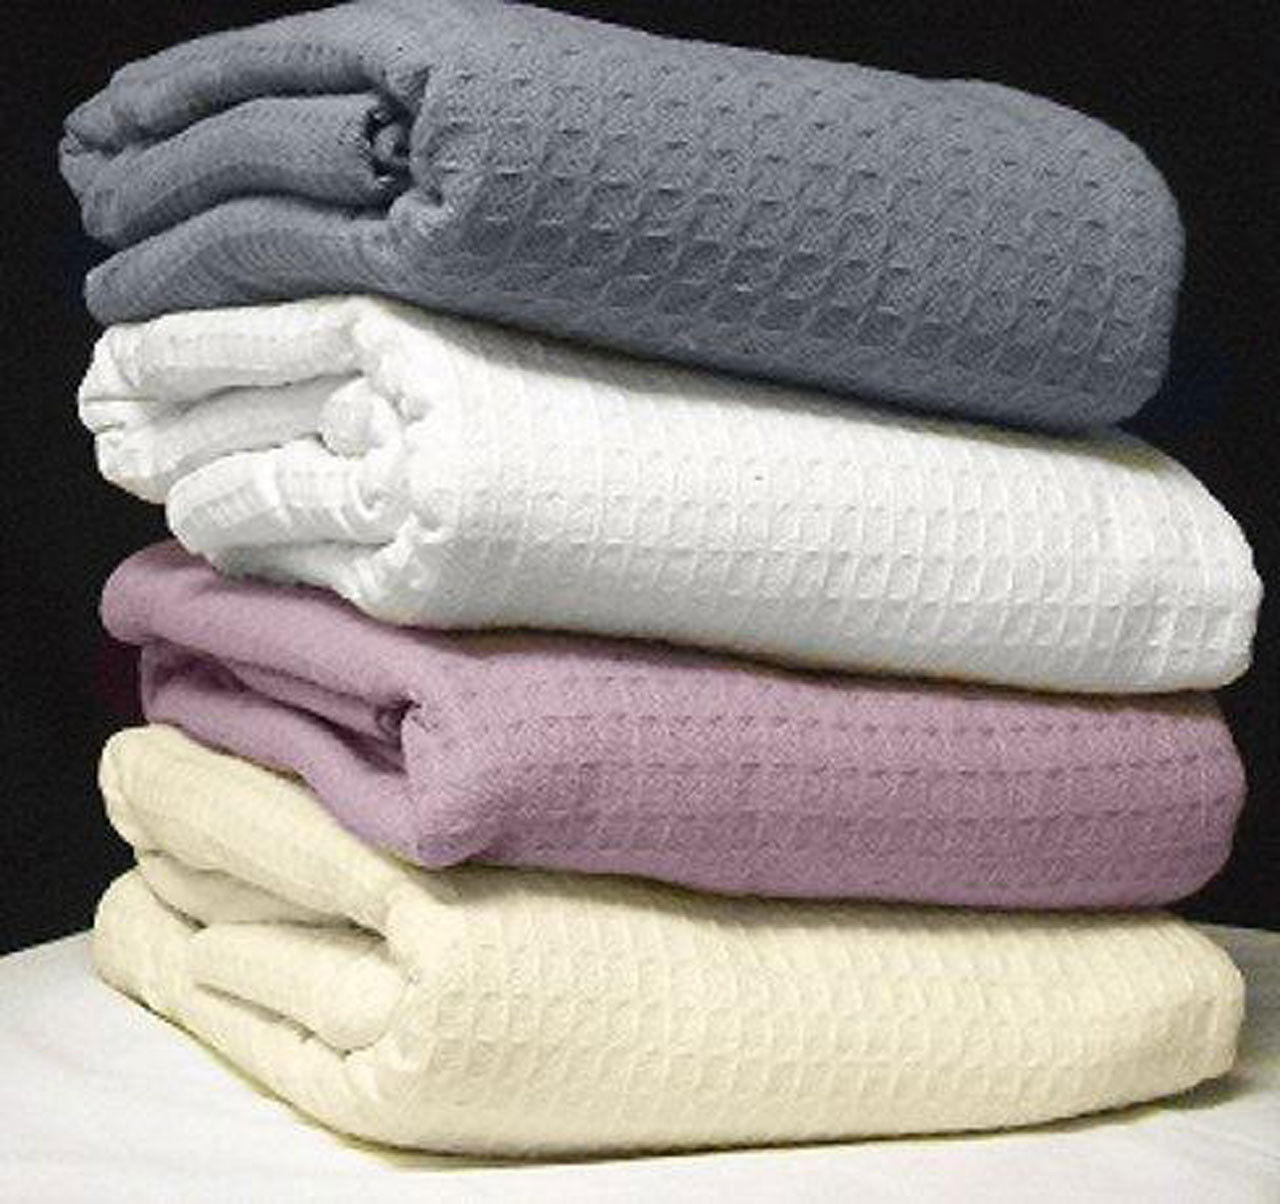 What type of material is used in the production of the Santa Clarita blanket?